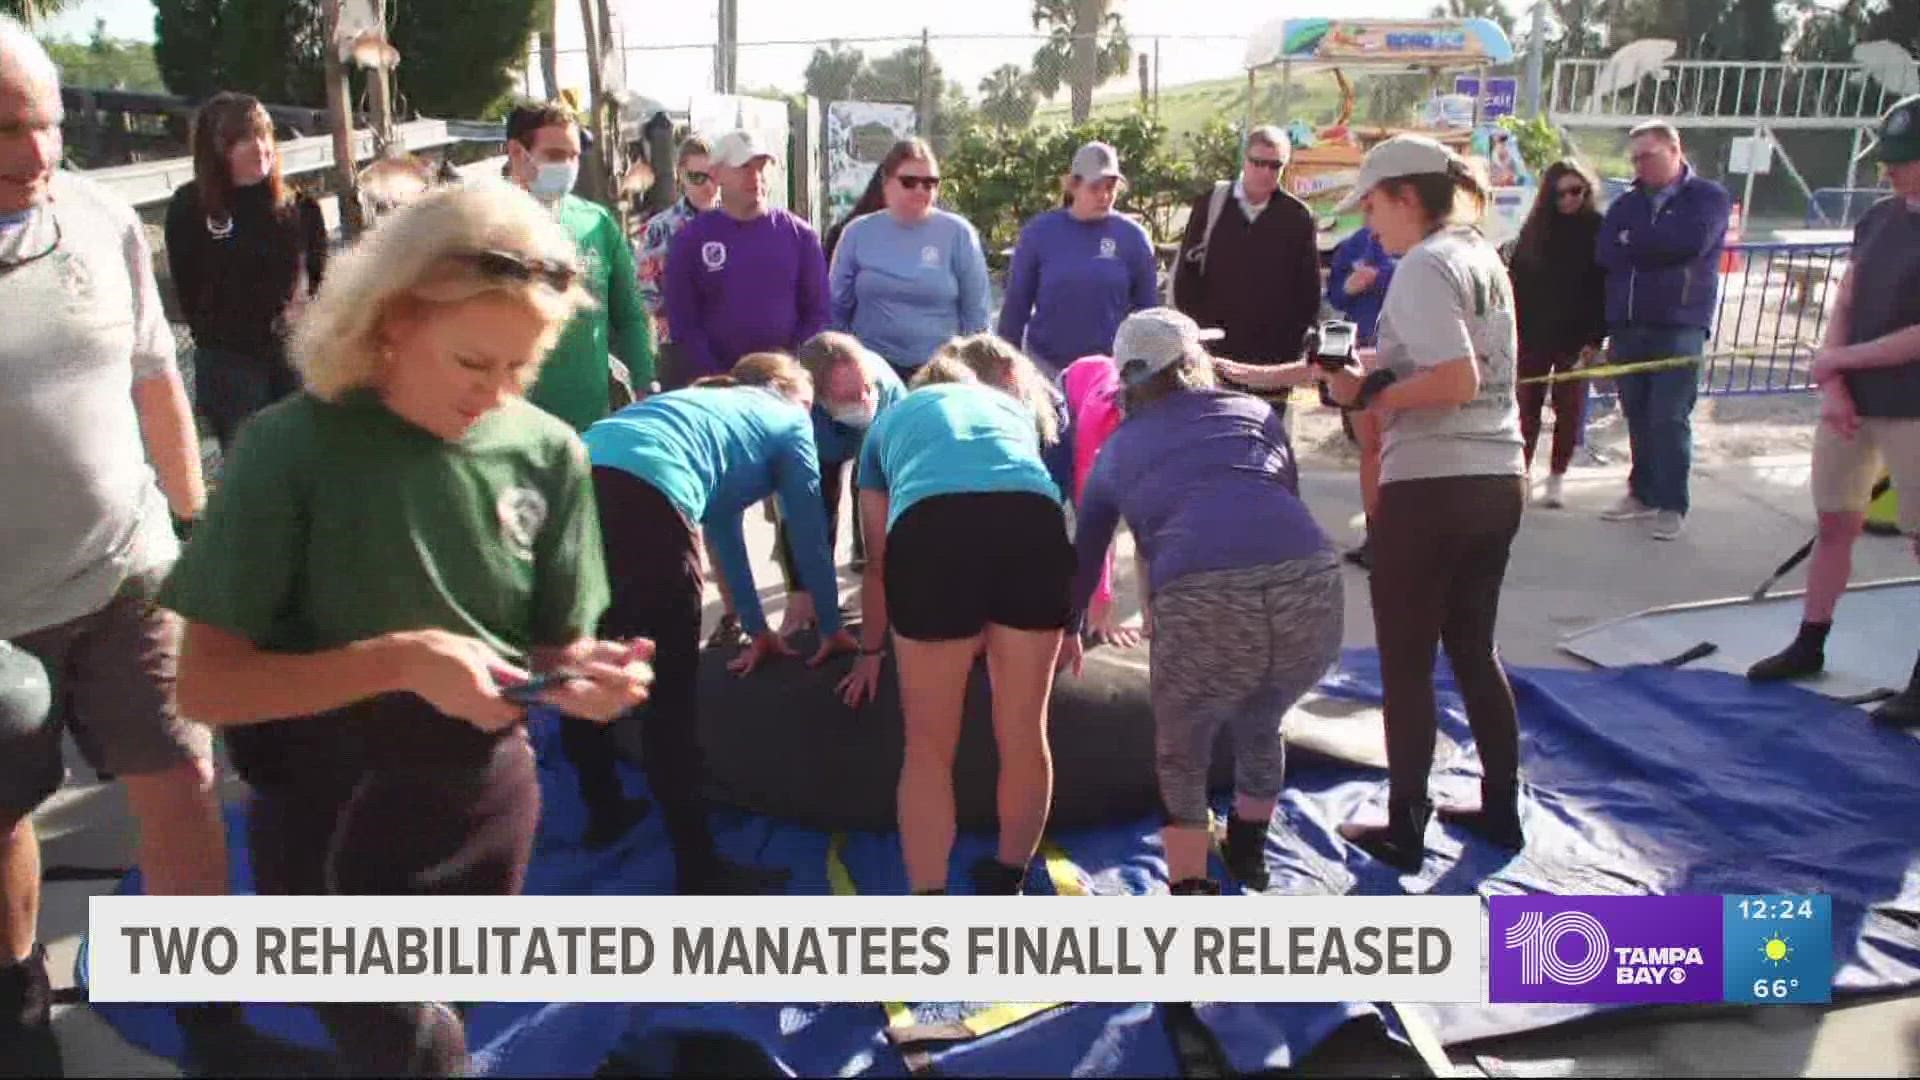 The two young manatees received round-the-clock care at ZooTampa's David A. Straz, Jr. Manatee Critical Care Center.